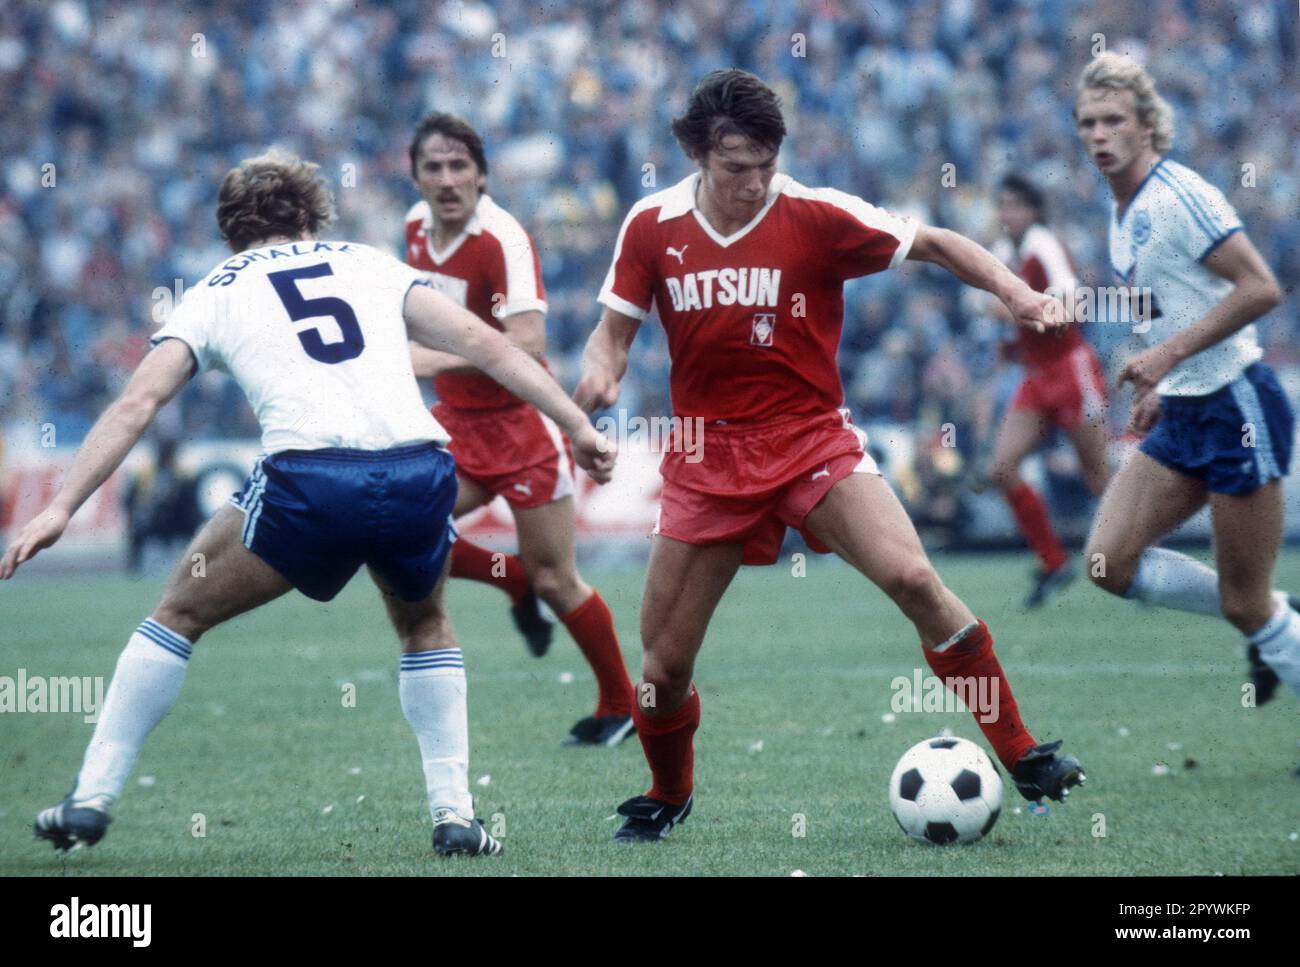 FC Schalke 04 - Borussia Mönchengladbach 2:4/21.08.1982 in Gelsenkirchen. Lothar Matthäus (BMG) action on the ball. For journalistic use only! Only for editorial use! [automated translation] Stock Photo